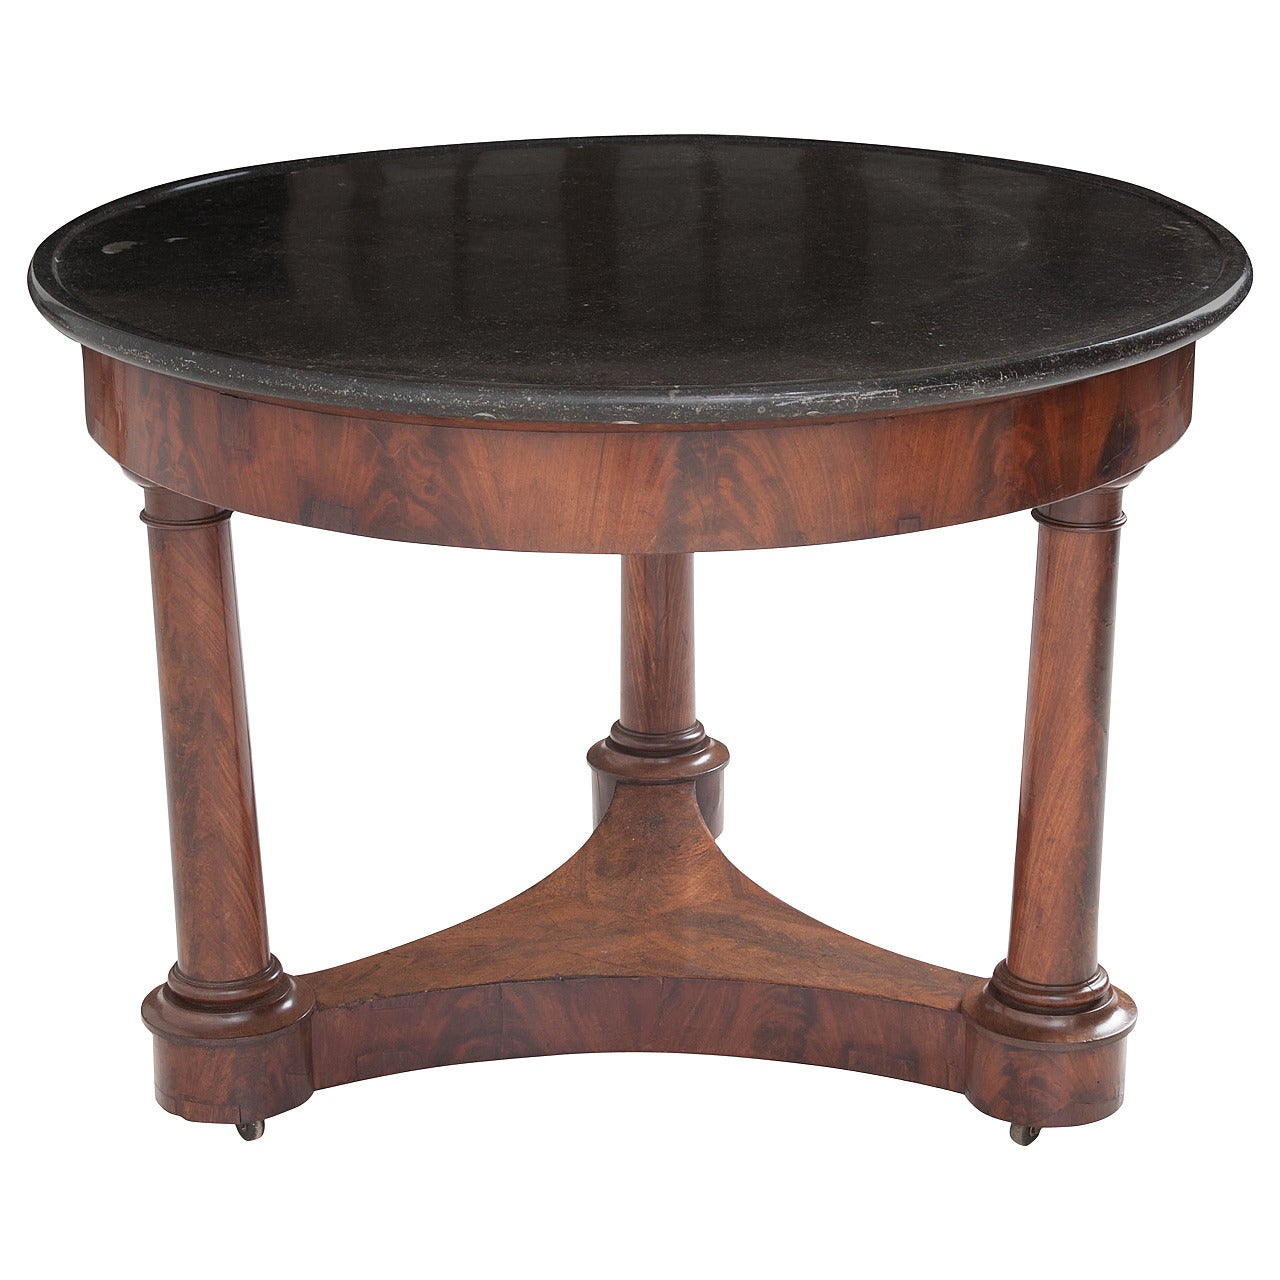 French 19th Century Empire Flame Mahogany and Marble Center Table